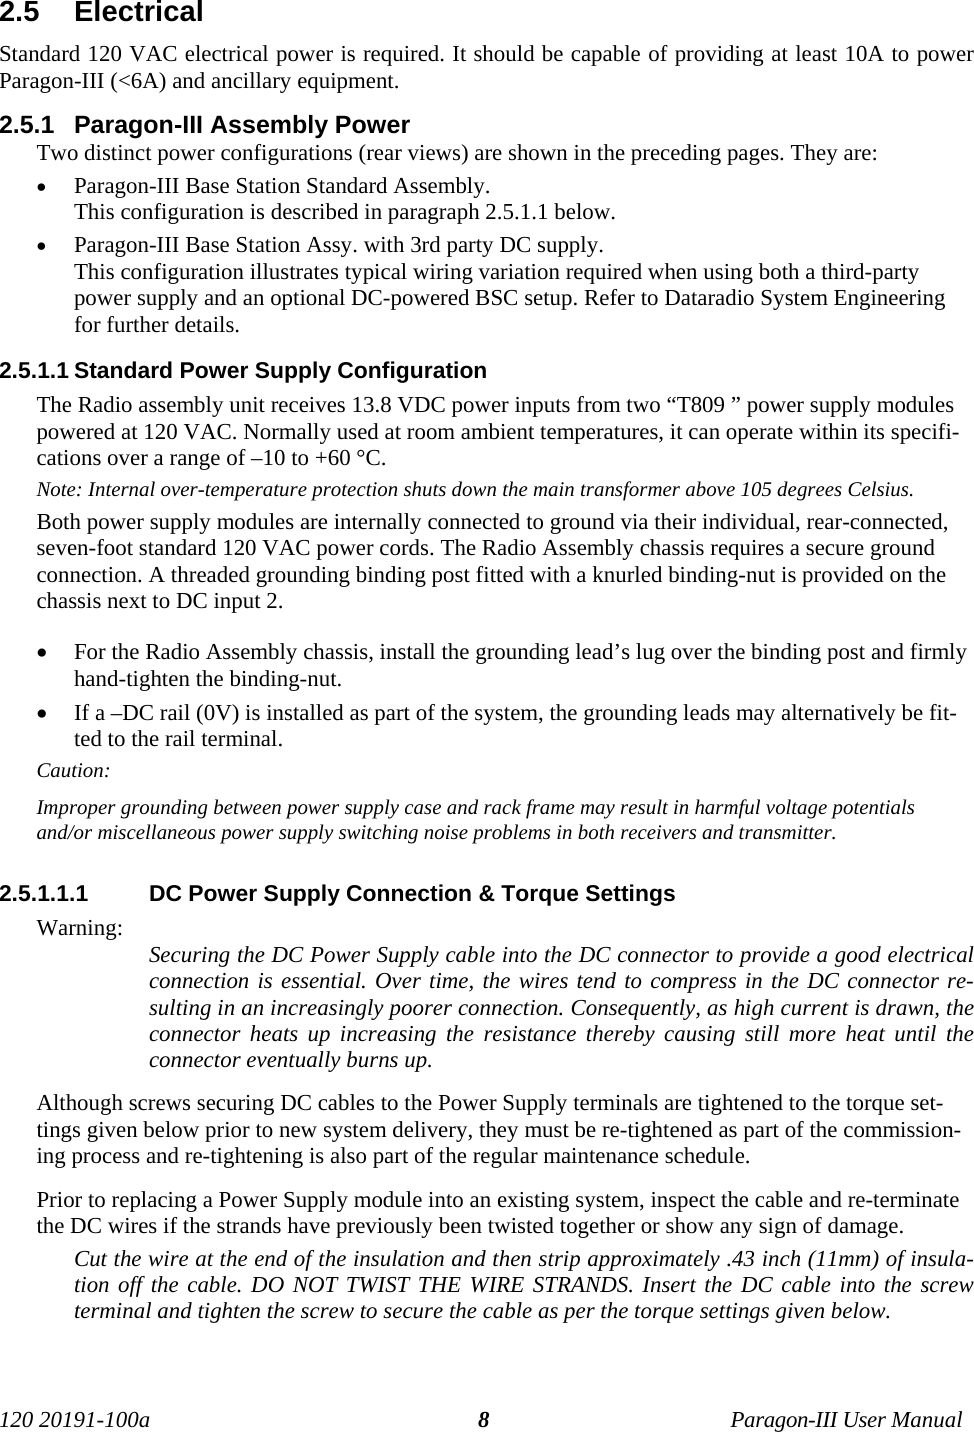 120 20191-100a Paragon-III User Manual82.5  ElectricalStandard 120 VAC electrical power is required. It should be capable of providing at least 10A to powerParagon-III (&lt;6A) and ancillary equipment.2.5.1  Paragon-III Assembly PowerTwo distinct power configurations (rear views) are shown in the preceding pages. They are:• Paragon-III Base Station Standard Assembly.This configuration is described in paragraph 2.5.1.1 below.• Paragon-III Base Station Assy. with 3rd party DC supply. This configuration illustrates typical wiring variation required when using both a third-partypower supply and an optional DC-powered BSC setup. Refer to Dataradio System Engineeringfor further details.2.5.1.1 Standard Power Supply ConfigurationThe Radio assembly unit receives 13.8 VDC power inputs from two “T809 ” power supply modulespowered at 120 VAC. Normally used at room ambient temperatures, it can operate within its specifi-cations over a range of –10 to +60 °C.Note: Internal over-temperature protection shuts down the main transformer above 105 degrees Celsius.Both power supply modules are internally connected to ground via their individual, rear-connected,seven-foot standard 120 VAC power cords. The Radio Assembly chassis requires a secure groundconnection. A threaded grounding binding post fitted with a knurled binding-nut is provided on thechassis next to DC input 2. • For the Radio Assembly chassis, install the grounding lead’s lug over the binding post and firmlyhand-tighten the binding-nut.• If a –DC rail (0V) is installed as part of the system, the grounding leads may alternatively be fit-ted to the rail terminal.Caution:Improper grounding between power supply case and rack frame may result in harmful voltage potentialsand/or miscellaneous power supply switching noise problems in both receivers and transmitter.2.5.1.1.1  DC Power Supply Connection &amp; Torque SettingsWarning: Securing the DC Power Supply cable into the DC connector to provide a good electricalconnection is essential. Over time, the wires tend to compress in the DC connector re-sulting in an increasingly poorer connection. Consequently, as high current is drawn, theconnector heats up increasing the resistance thereby causing still more heat until theconnector eventually burns up. Although screws securing DC cables to the Power Supply terminals are tightened to the torque set-tings given below prior to new system delivery, they must be re-tightened as part of the commission-ing process and re-tightening is also part of the regular maintenance schedule.Prior to replacing a Power Supply module into an existing system, inspect the cable and re-terminatethe DC wires if the strands have previously been twisted together or show any sign of damage.Cut the wire at the end of the insulation and then strip approximately .43 inch (11mm) of insula-tion off the cable. DO NOT TWIST THE WIRE STRANDS. Insert the DC cable into the screwterminal and tighten the screw to secure the cable as per the torque settings given below.